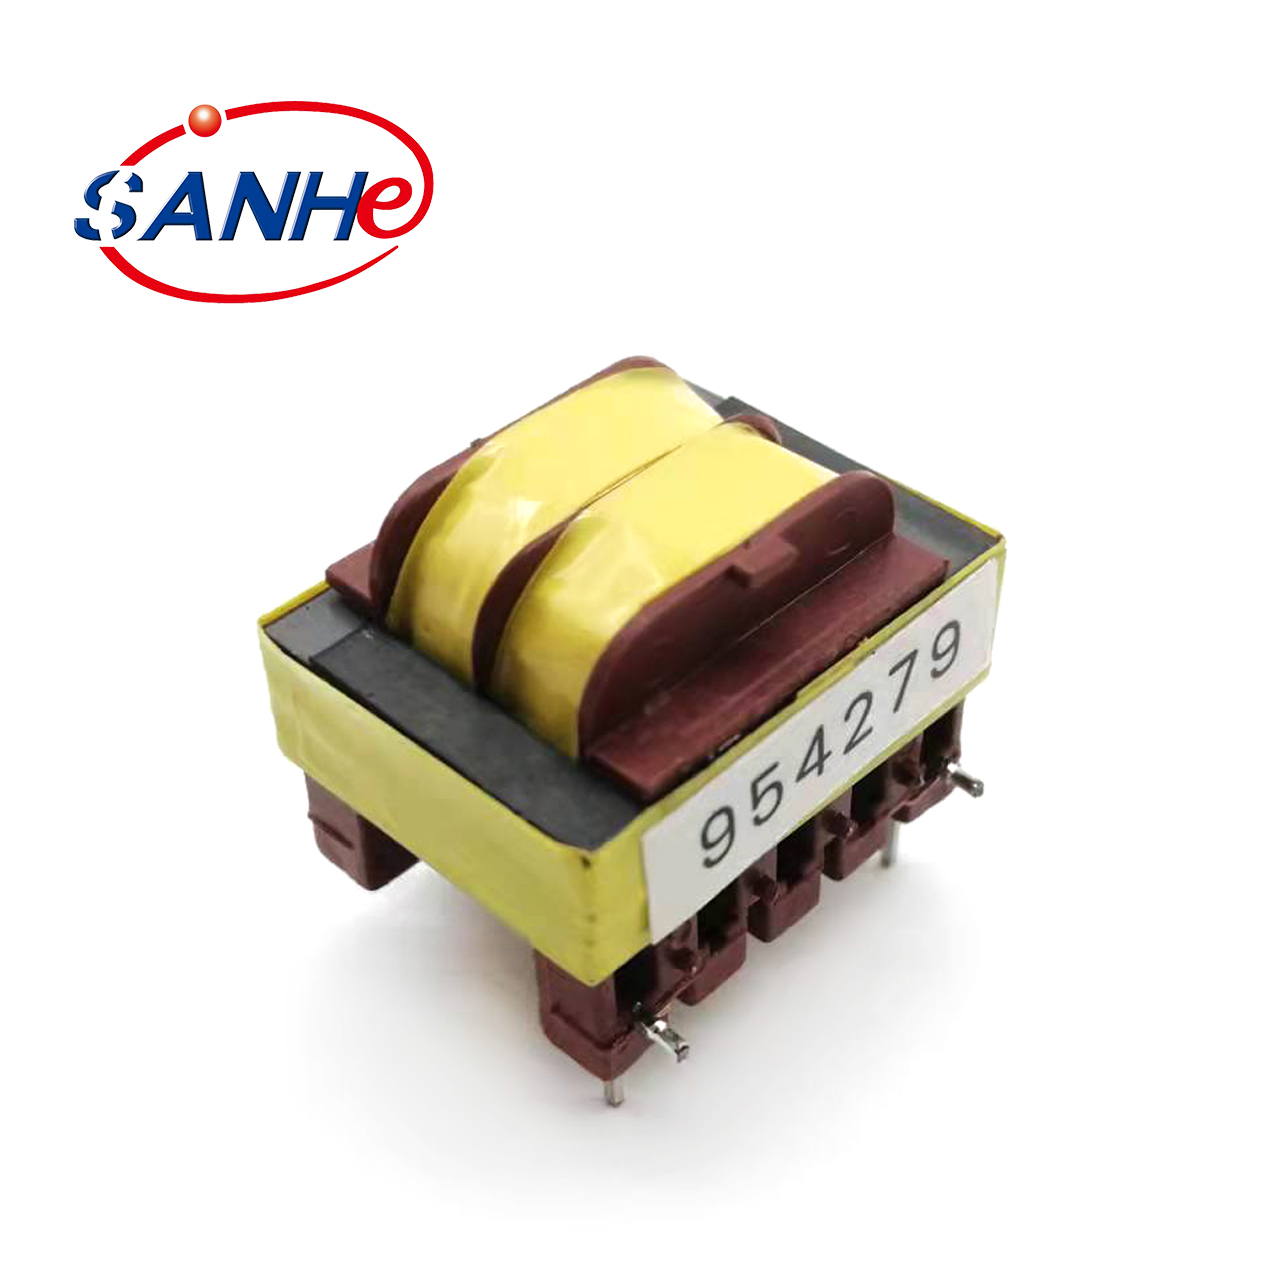 954279 is a type of popular Audio transformer